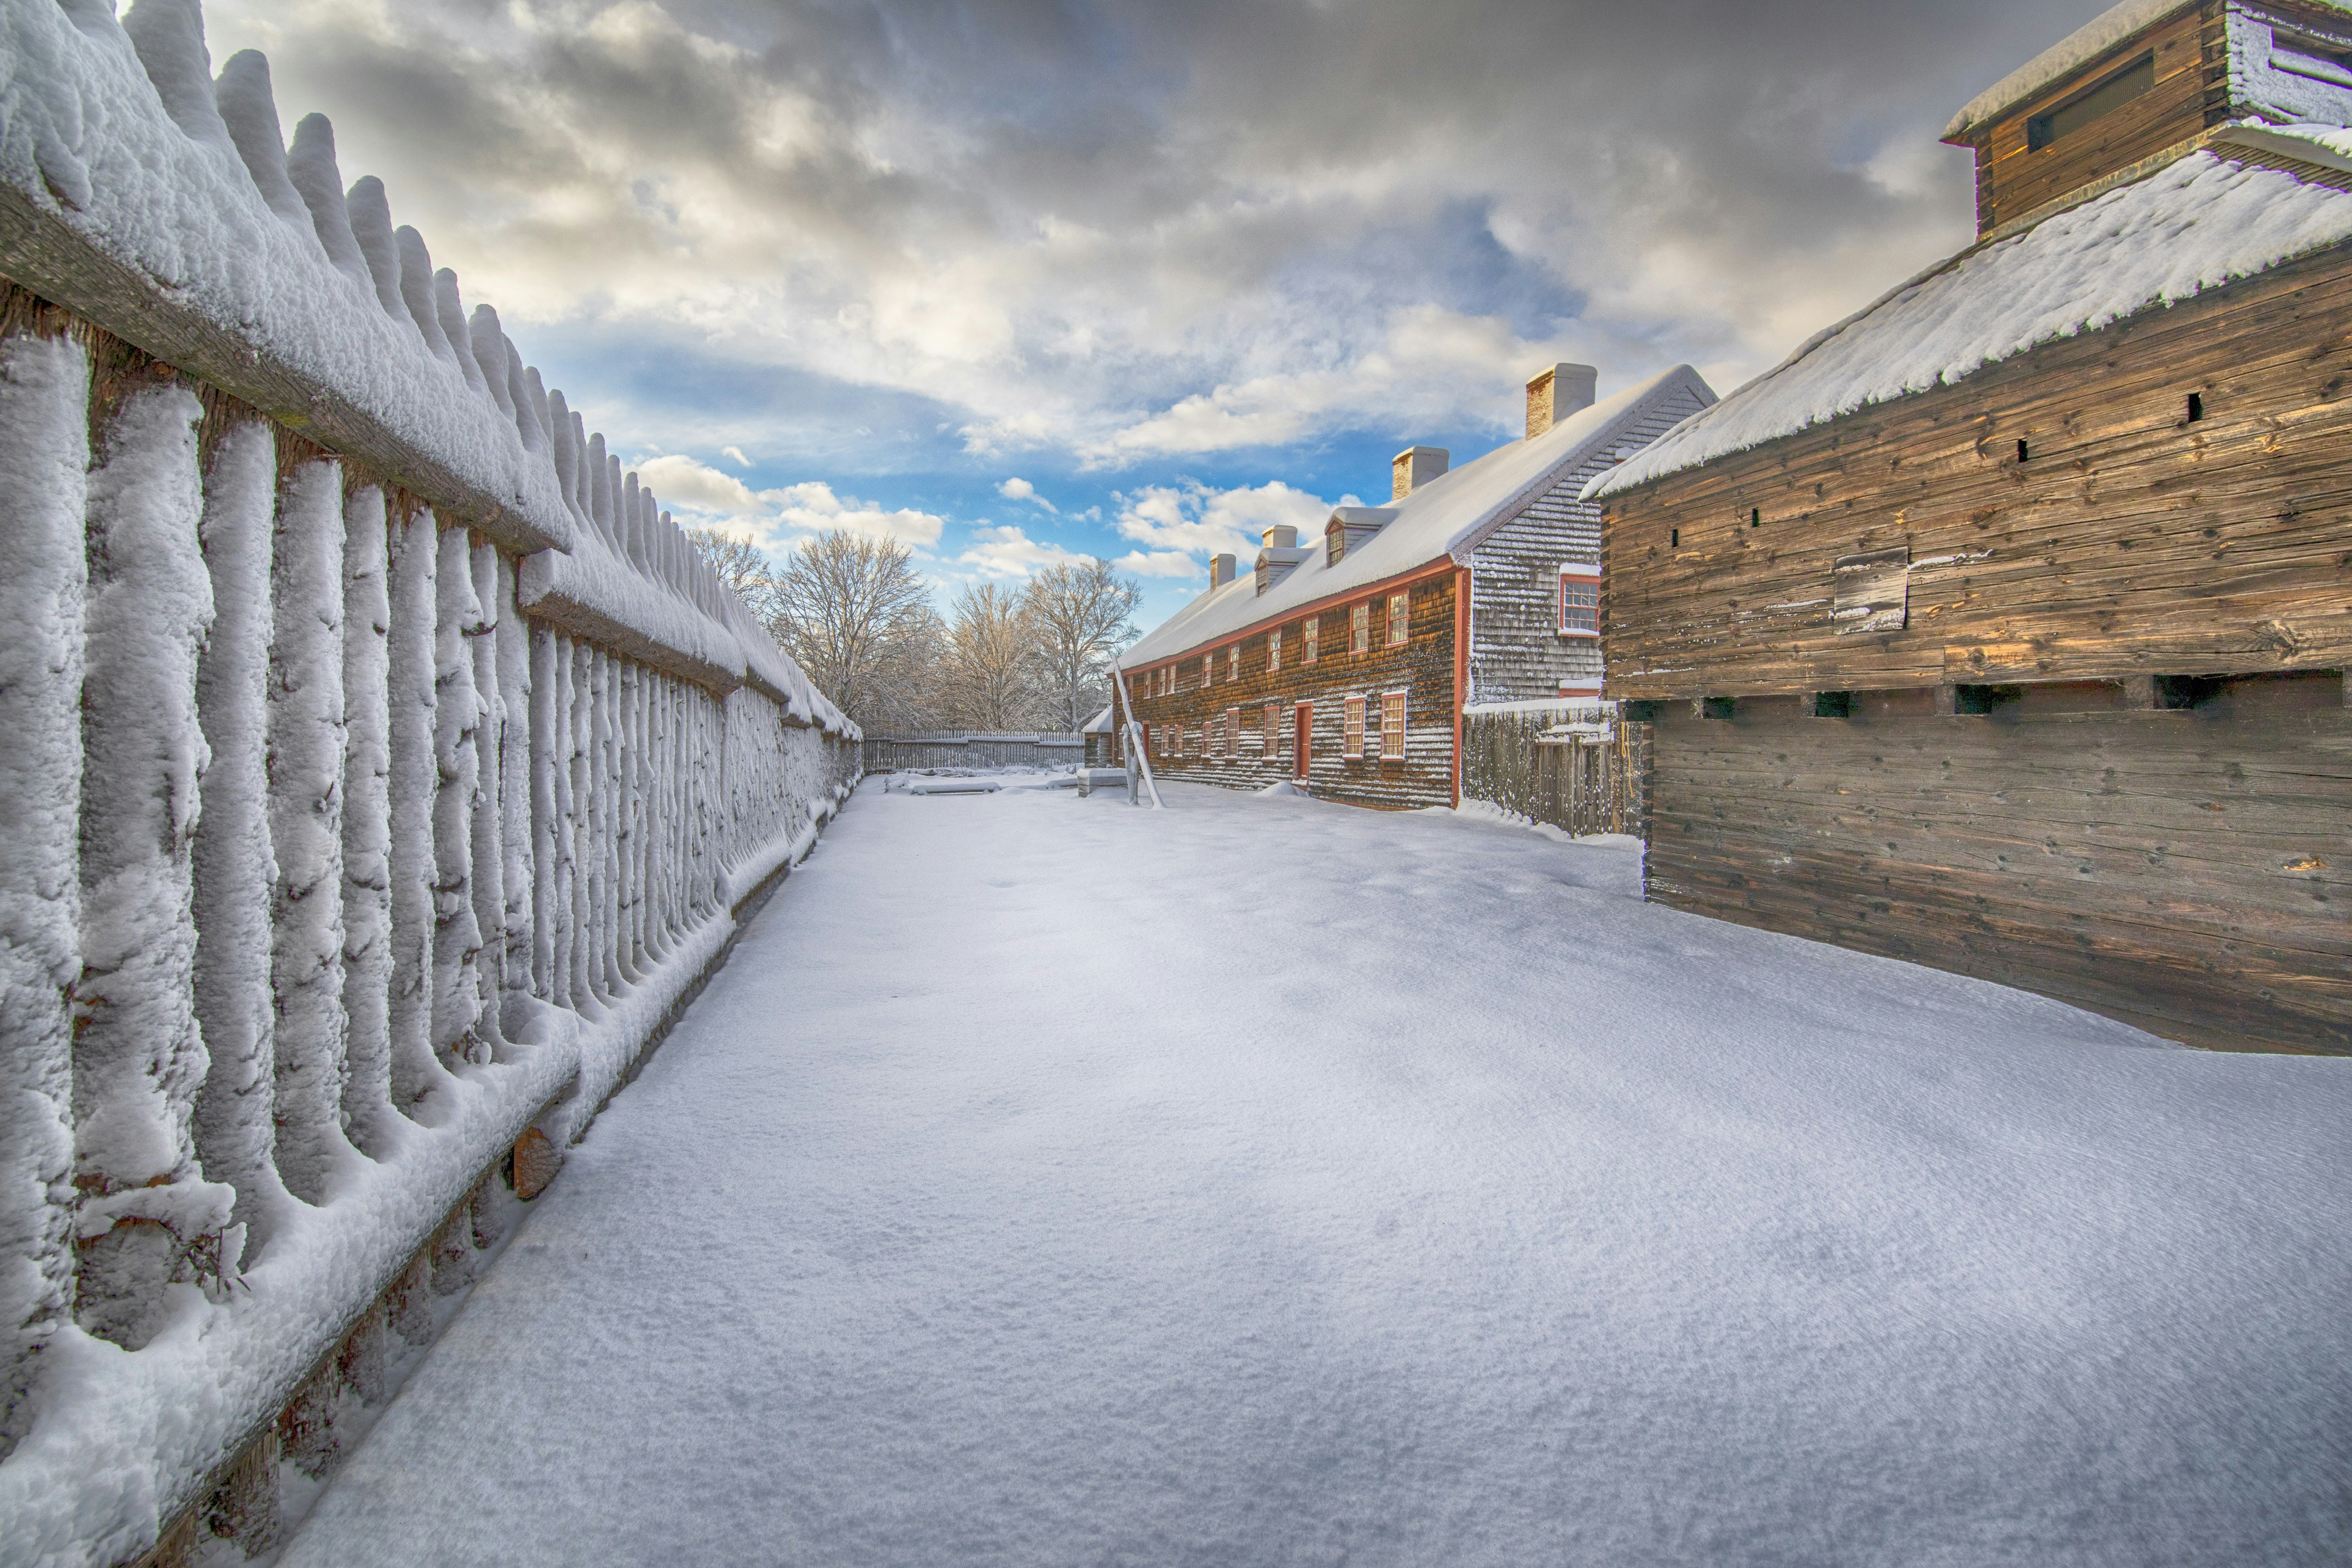 A winter day at Fort Western in Augusta, Maine. The oldest wooden fort in the United States, it is located on the eastern shore of the Kennebec River.